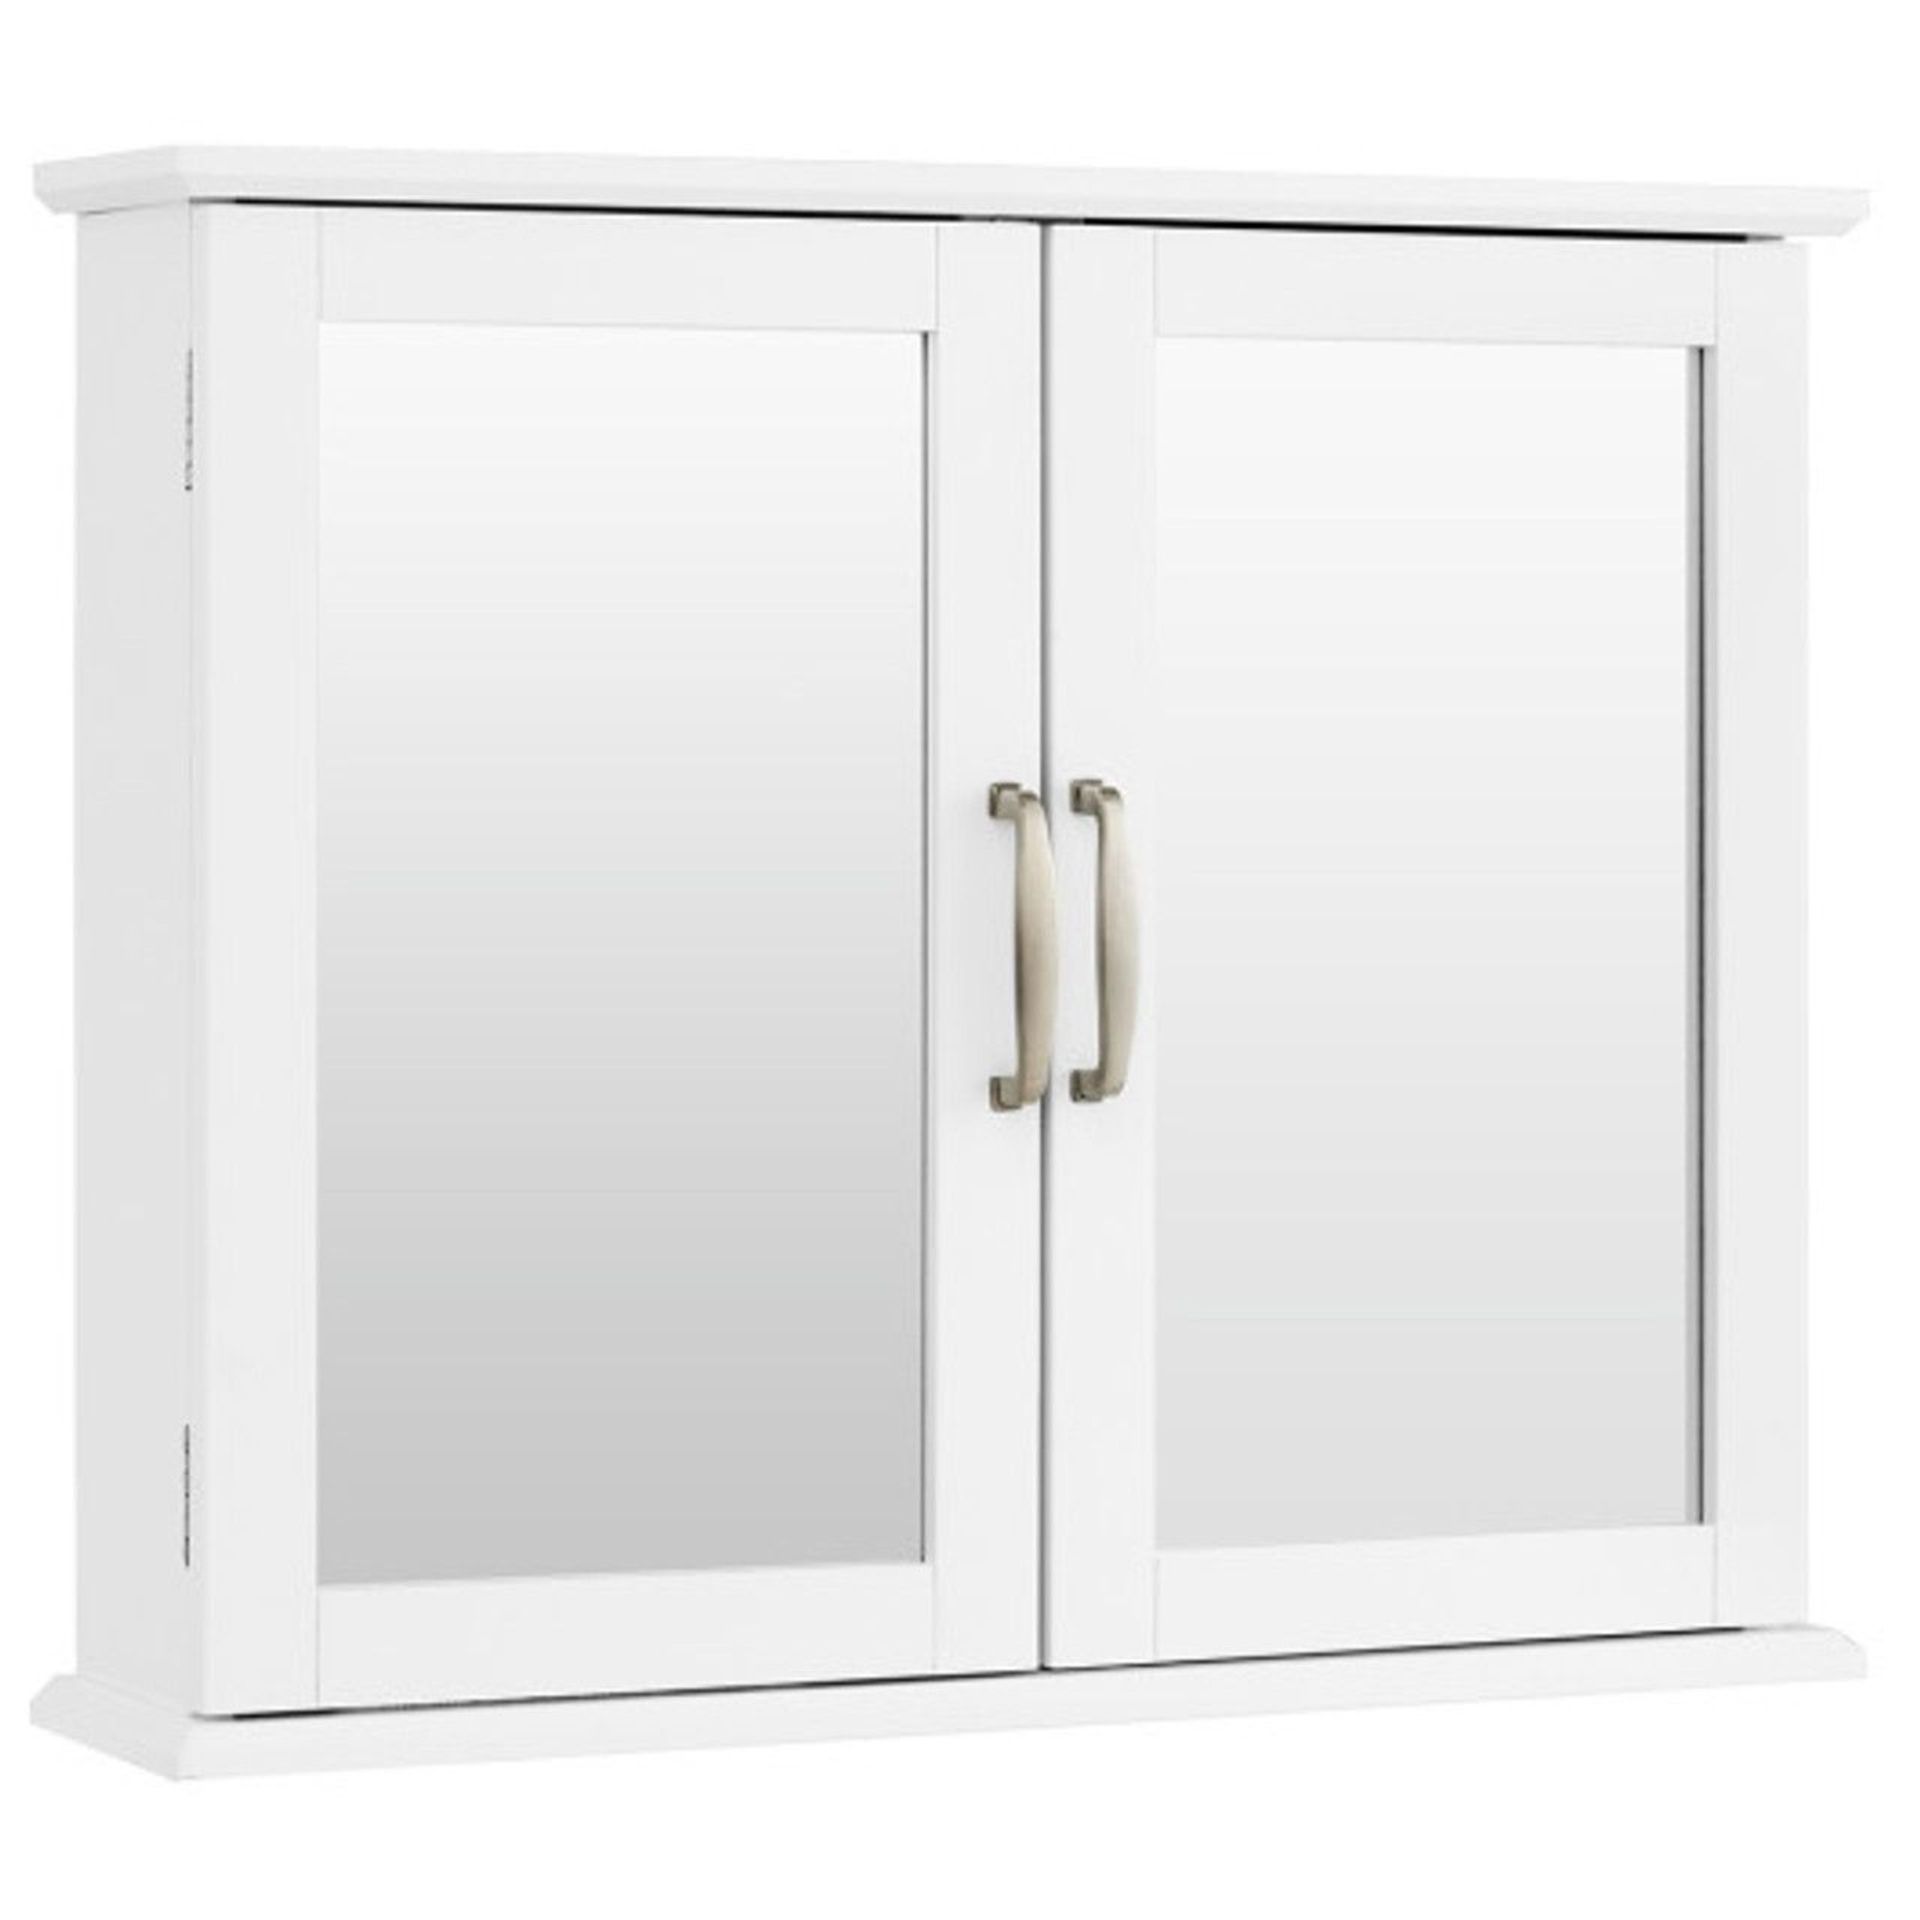 2-Tier Bathroom Wall-Mounted Mirror Storage Cabinet With Handles-White. - ER53.